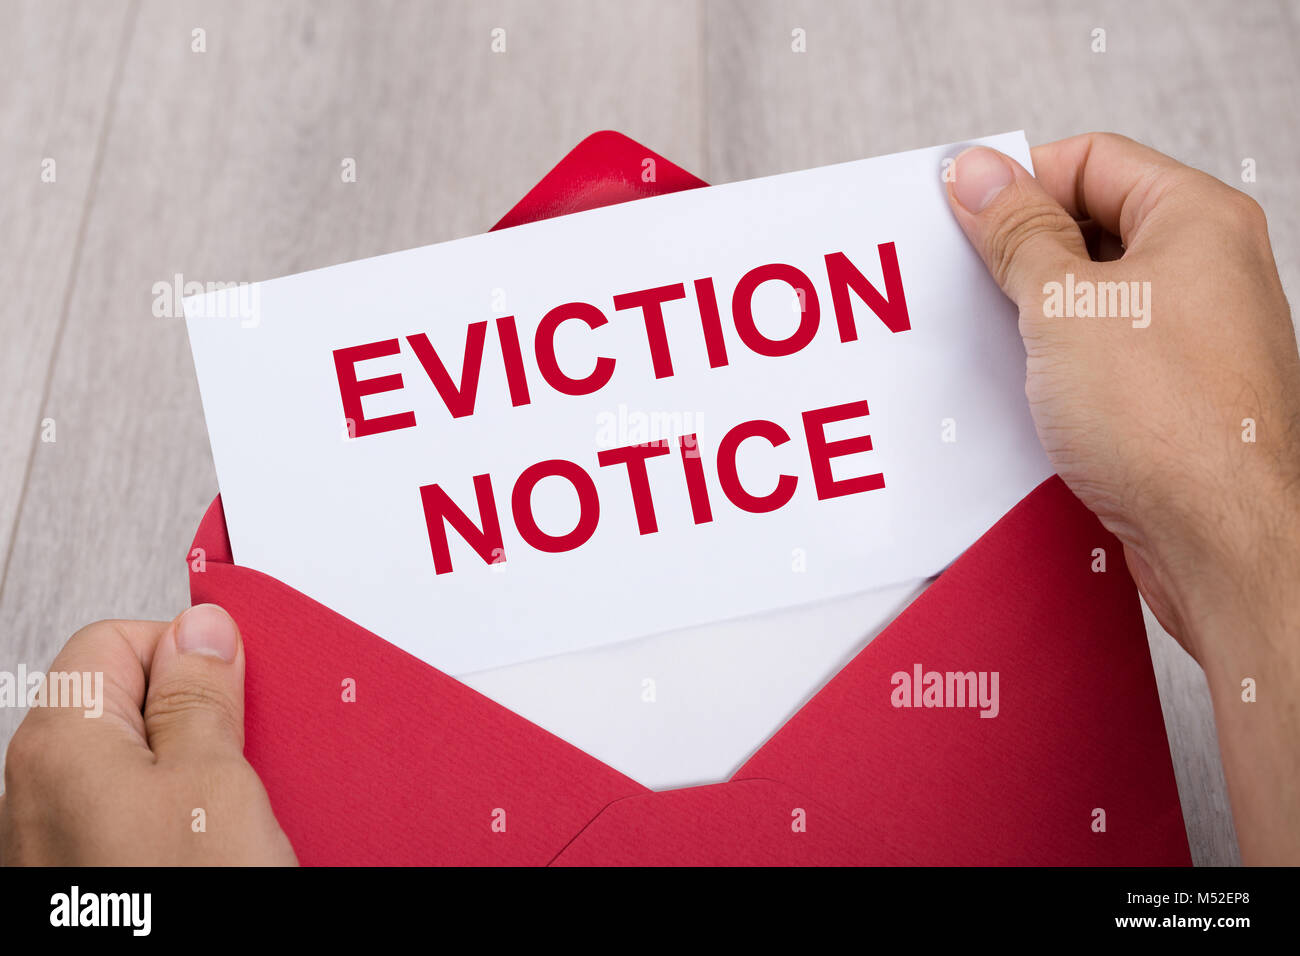 Close-up Of A Person's Hand Holding Eviction Notice In Red Envelope Stock Photo